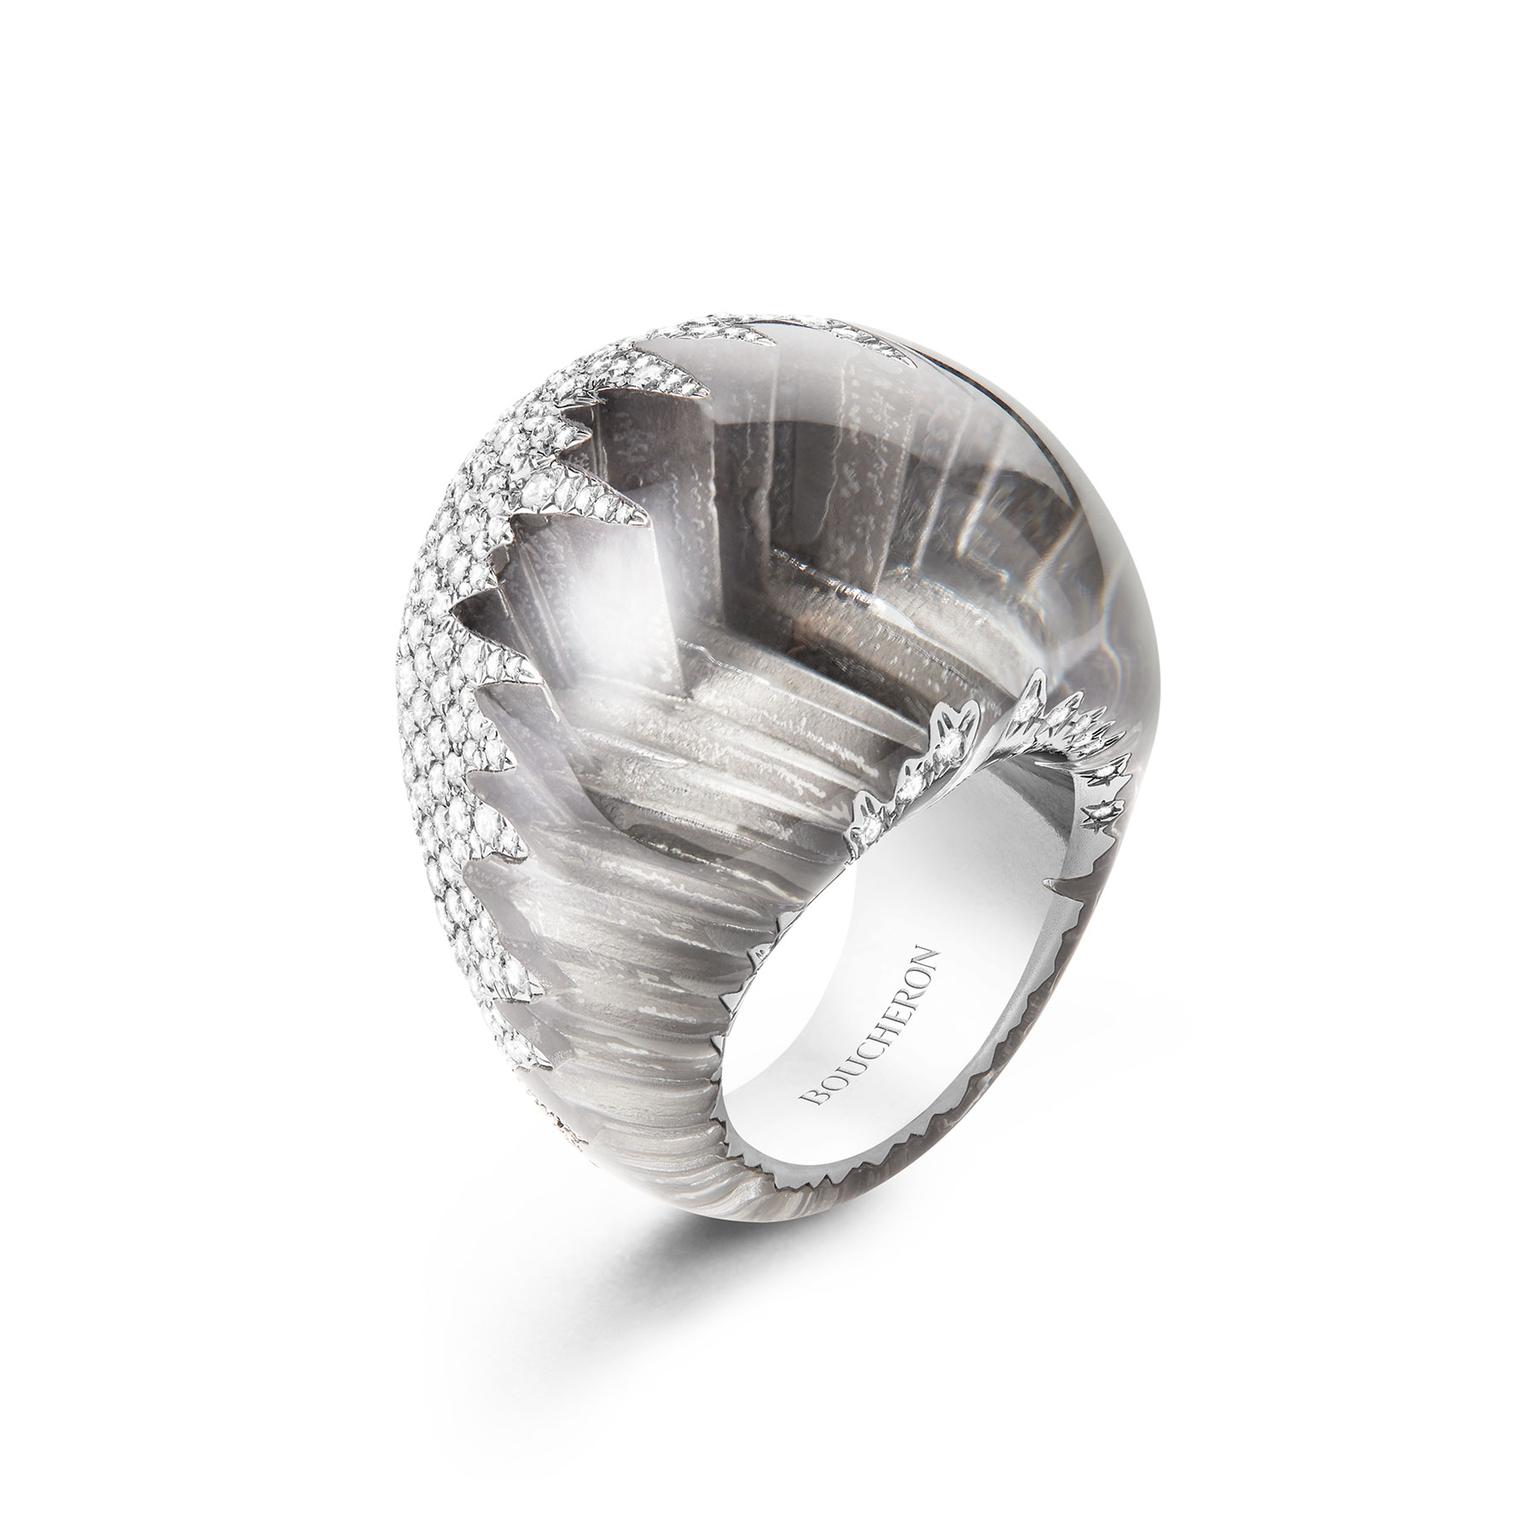 Boucheron Hiver Imperial frosted quartz and diamond ring